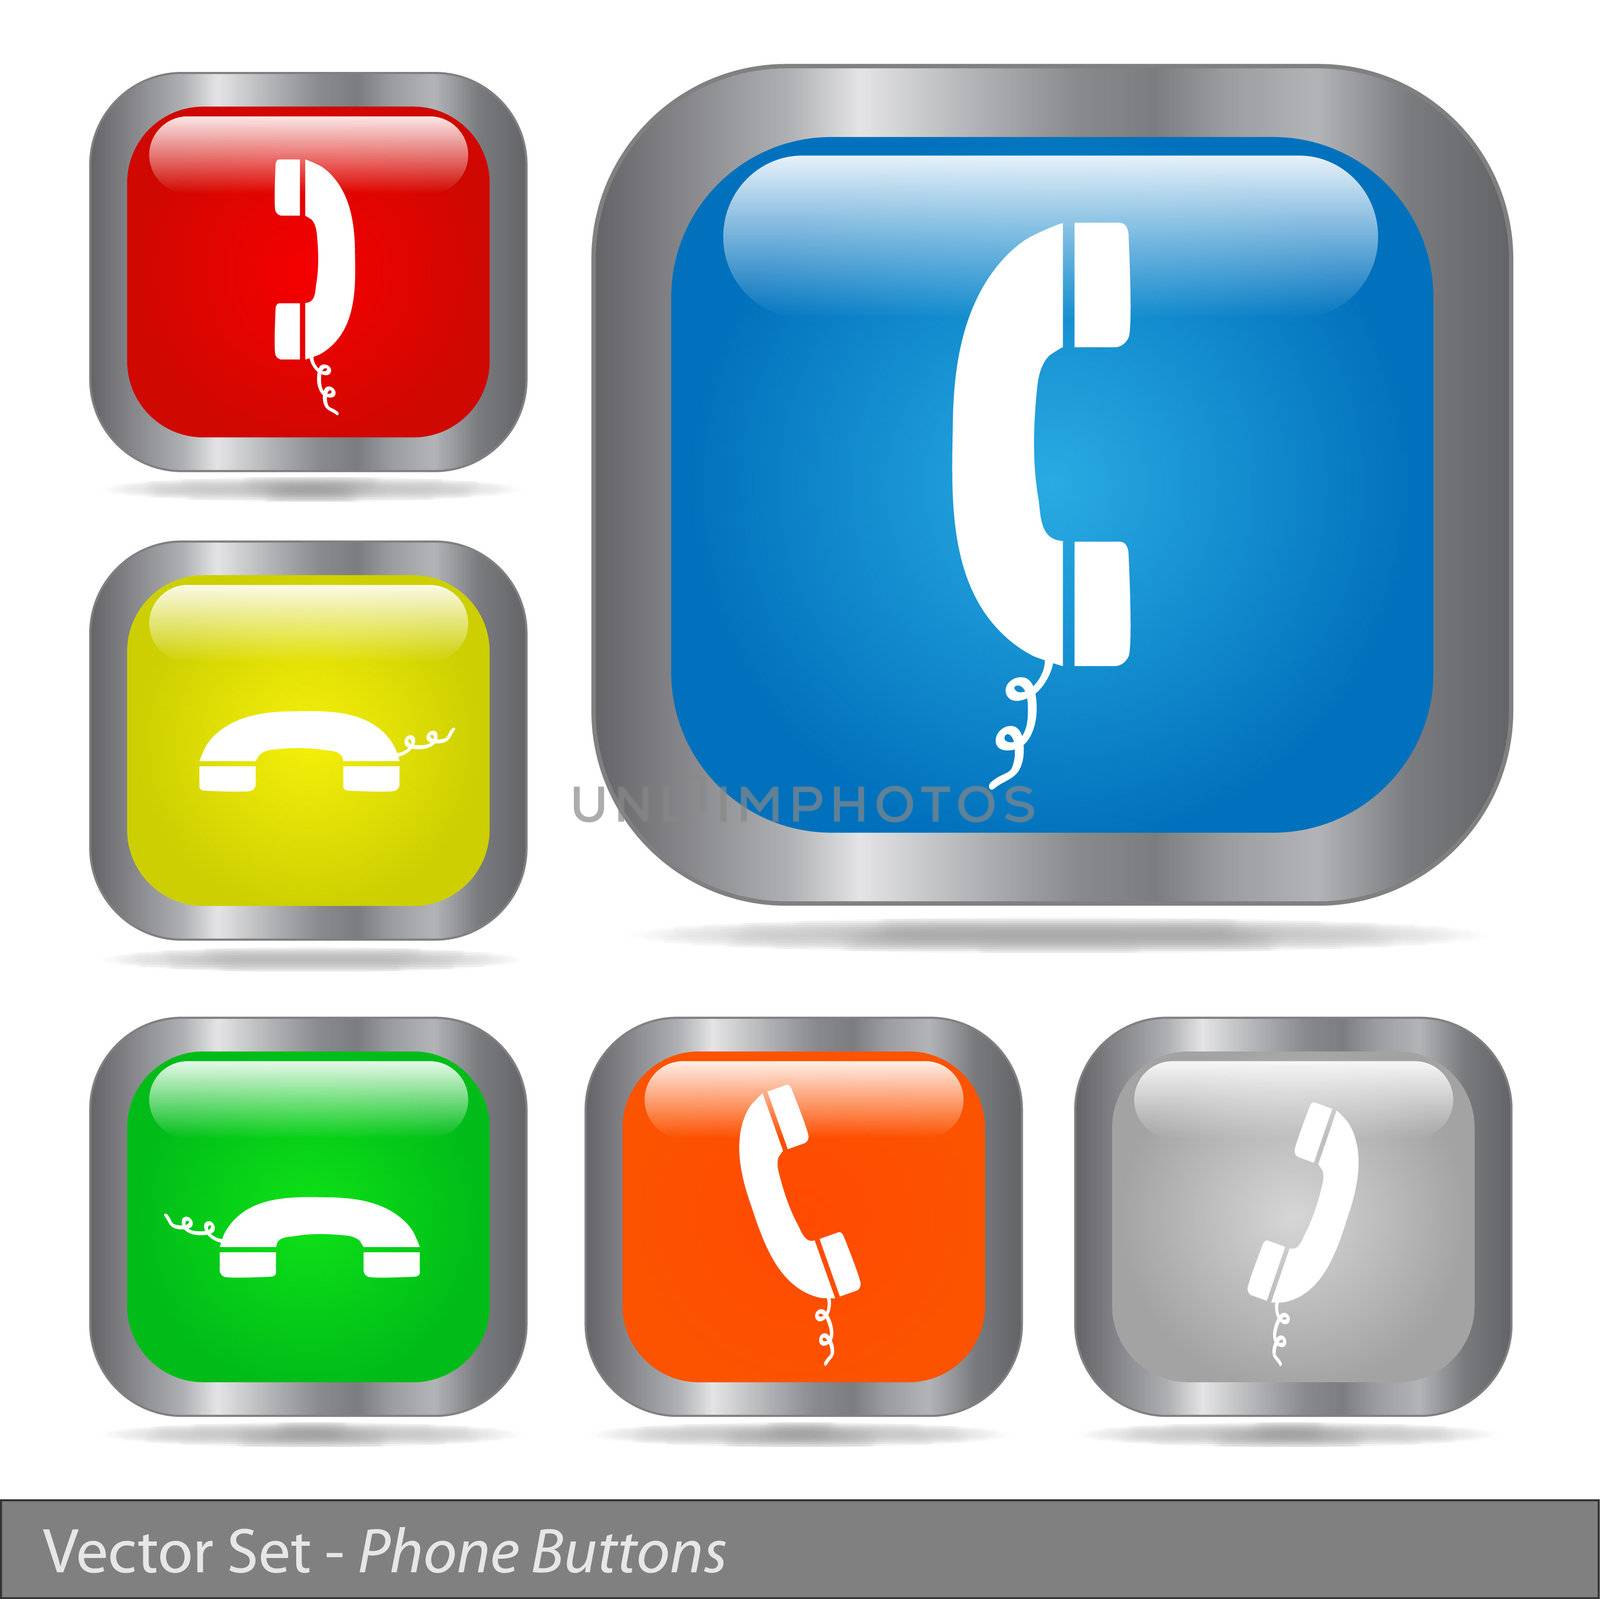 Image of various colorful phone buttons isolated on a white background.